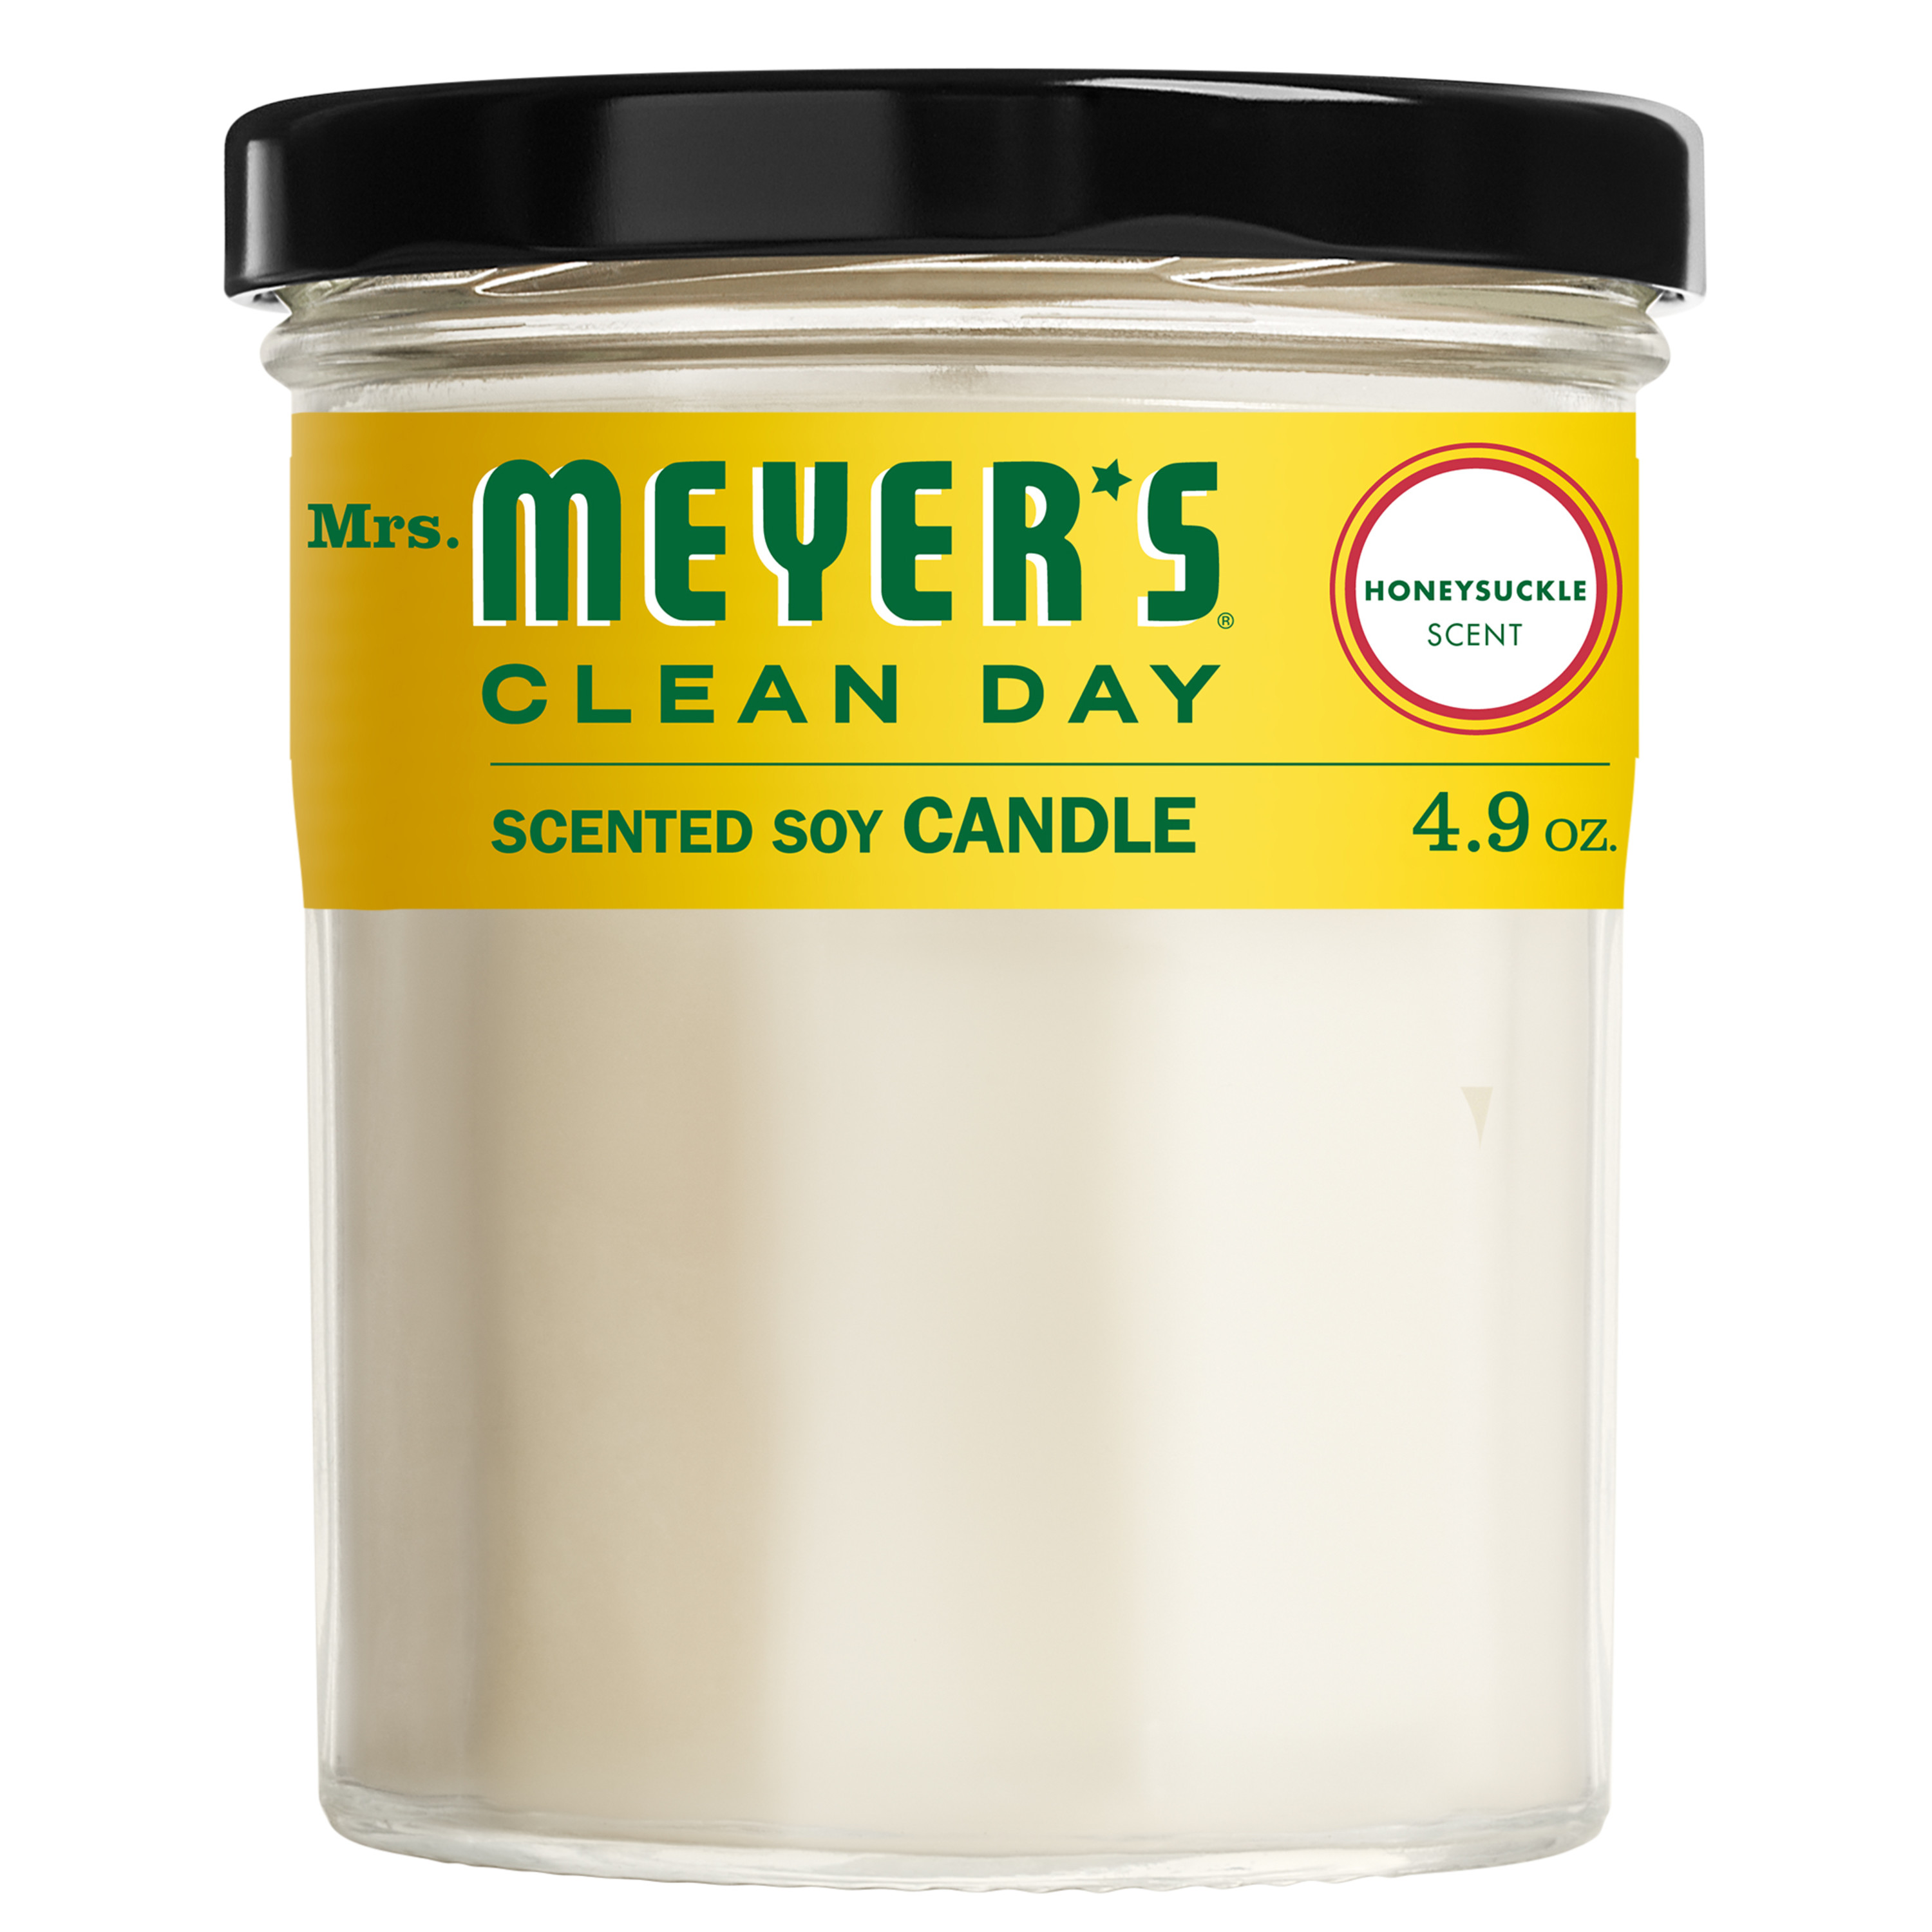 Mrs Meyers Clean Day  4.9 oz Soy Honeysuckle Candle - Small - Pack of 6 - image 1 of 7